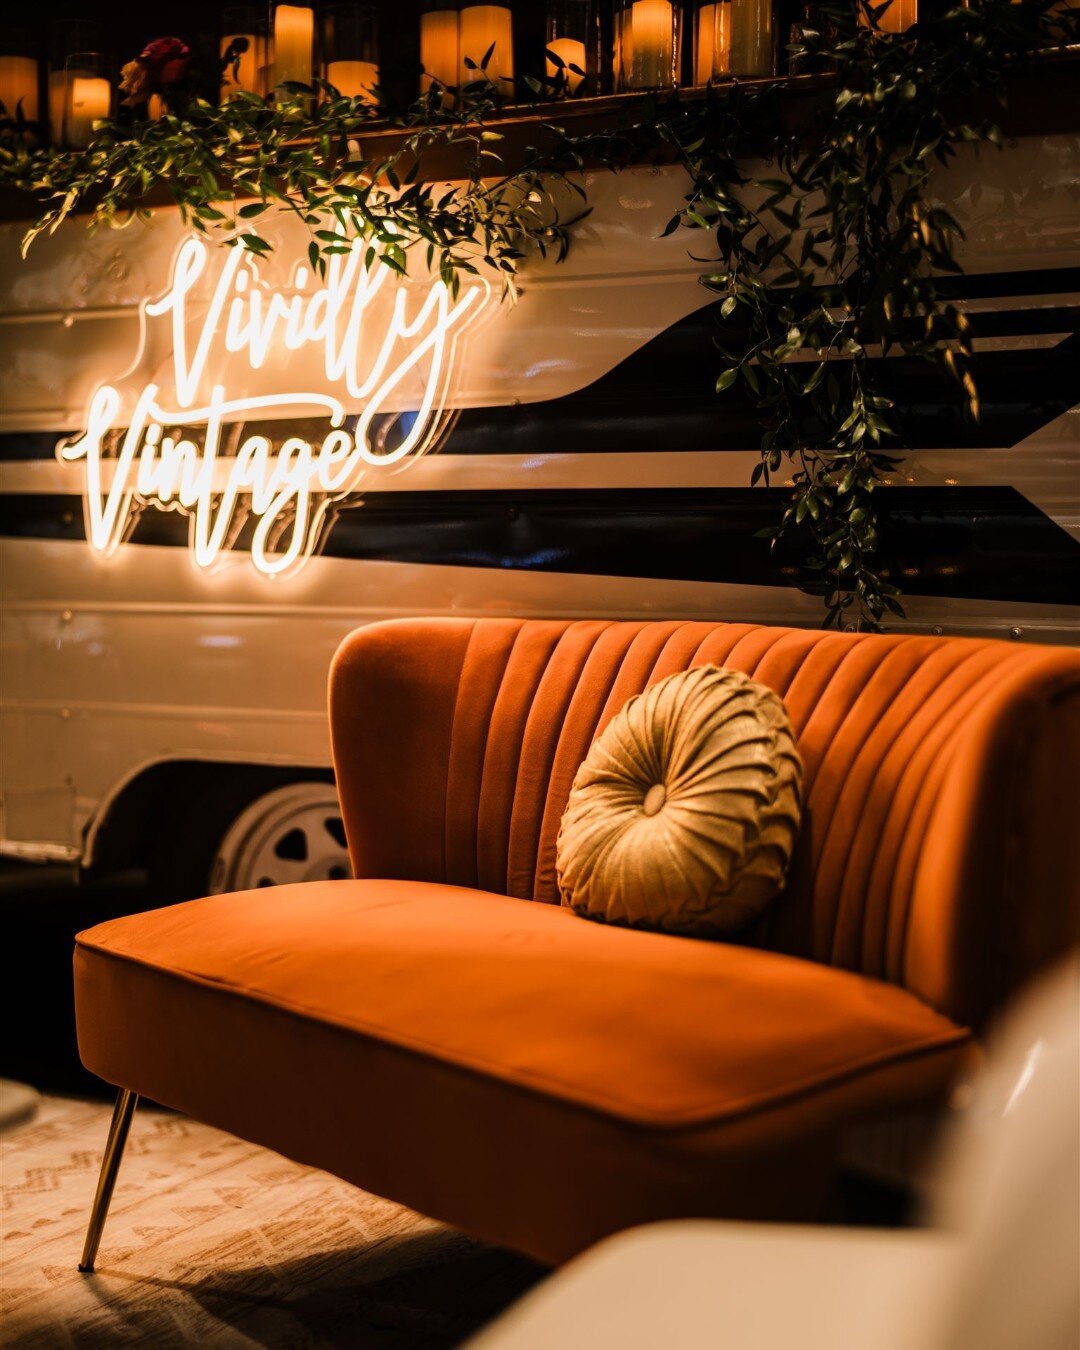 Can you imagine a more inviting seat? 🛋️ 💫 We were absolutely enchanted by the setup from @vividlyvintage_mobilebar. 

Their attention to detail and cozy atmosphere created the perfect spot for guests to relax and enjoy the festivities. 

Photo by 